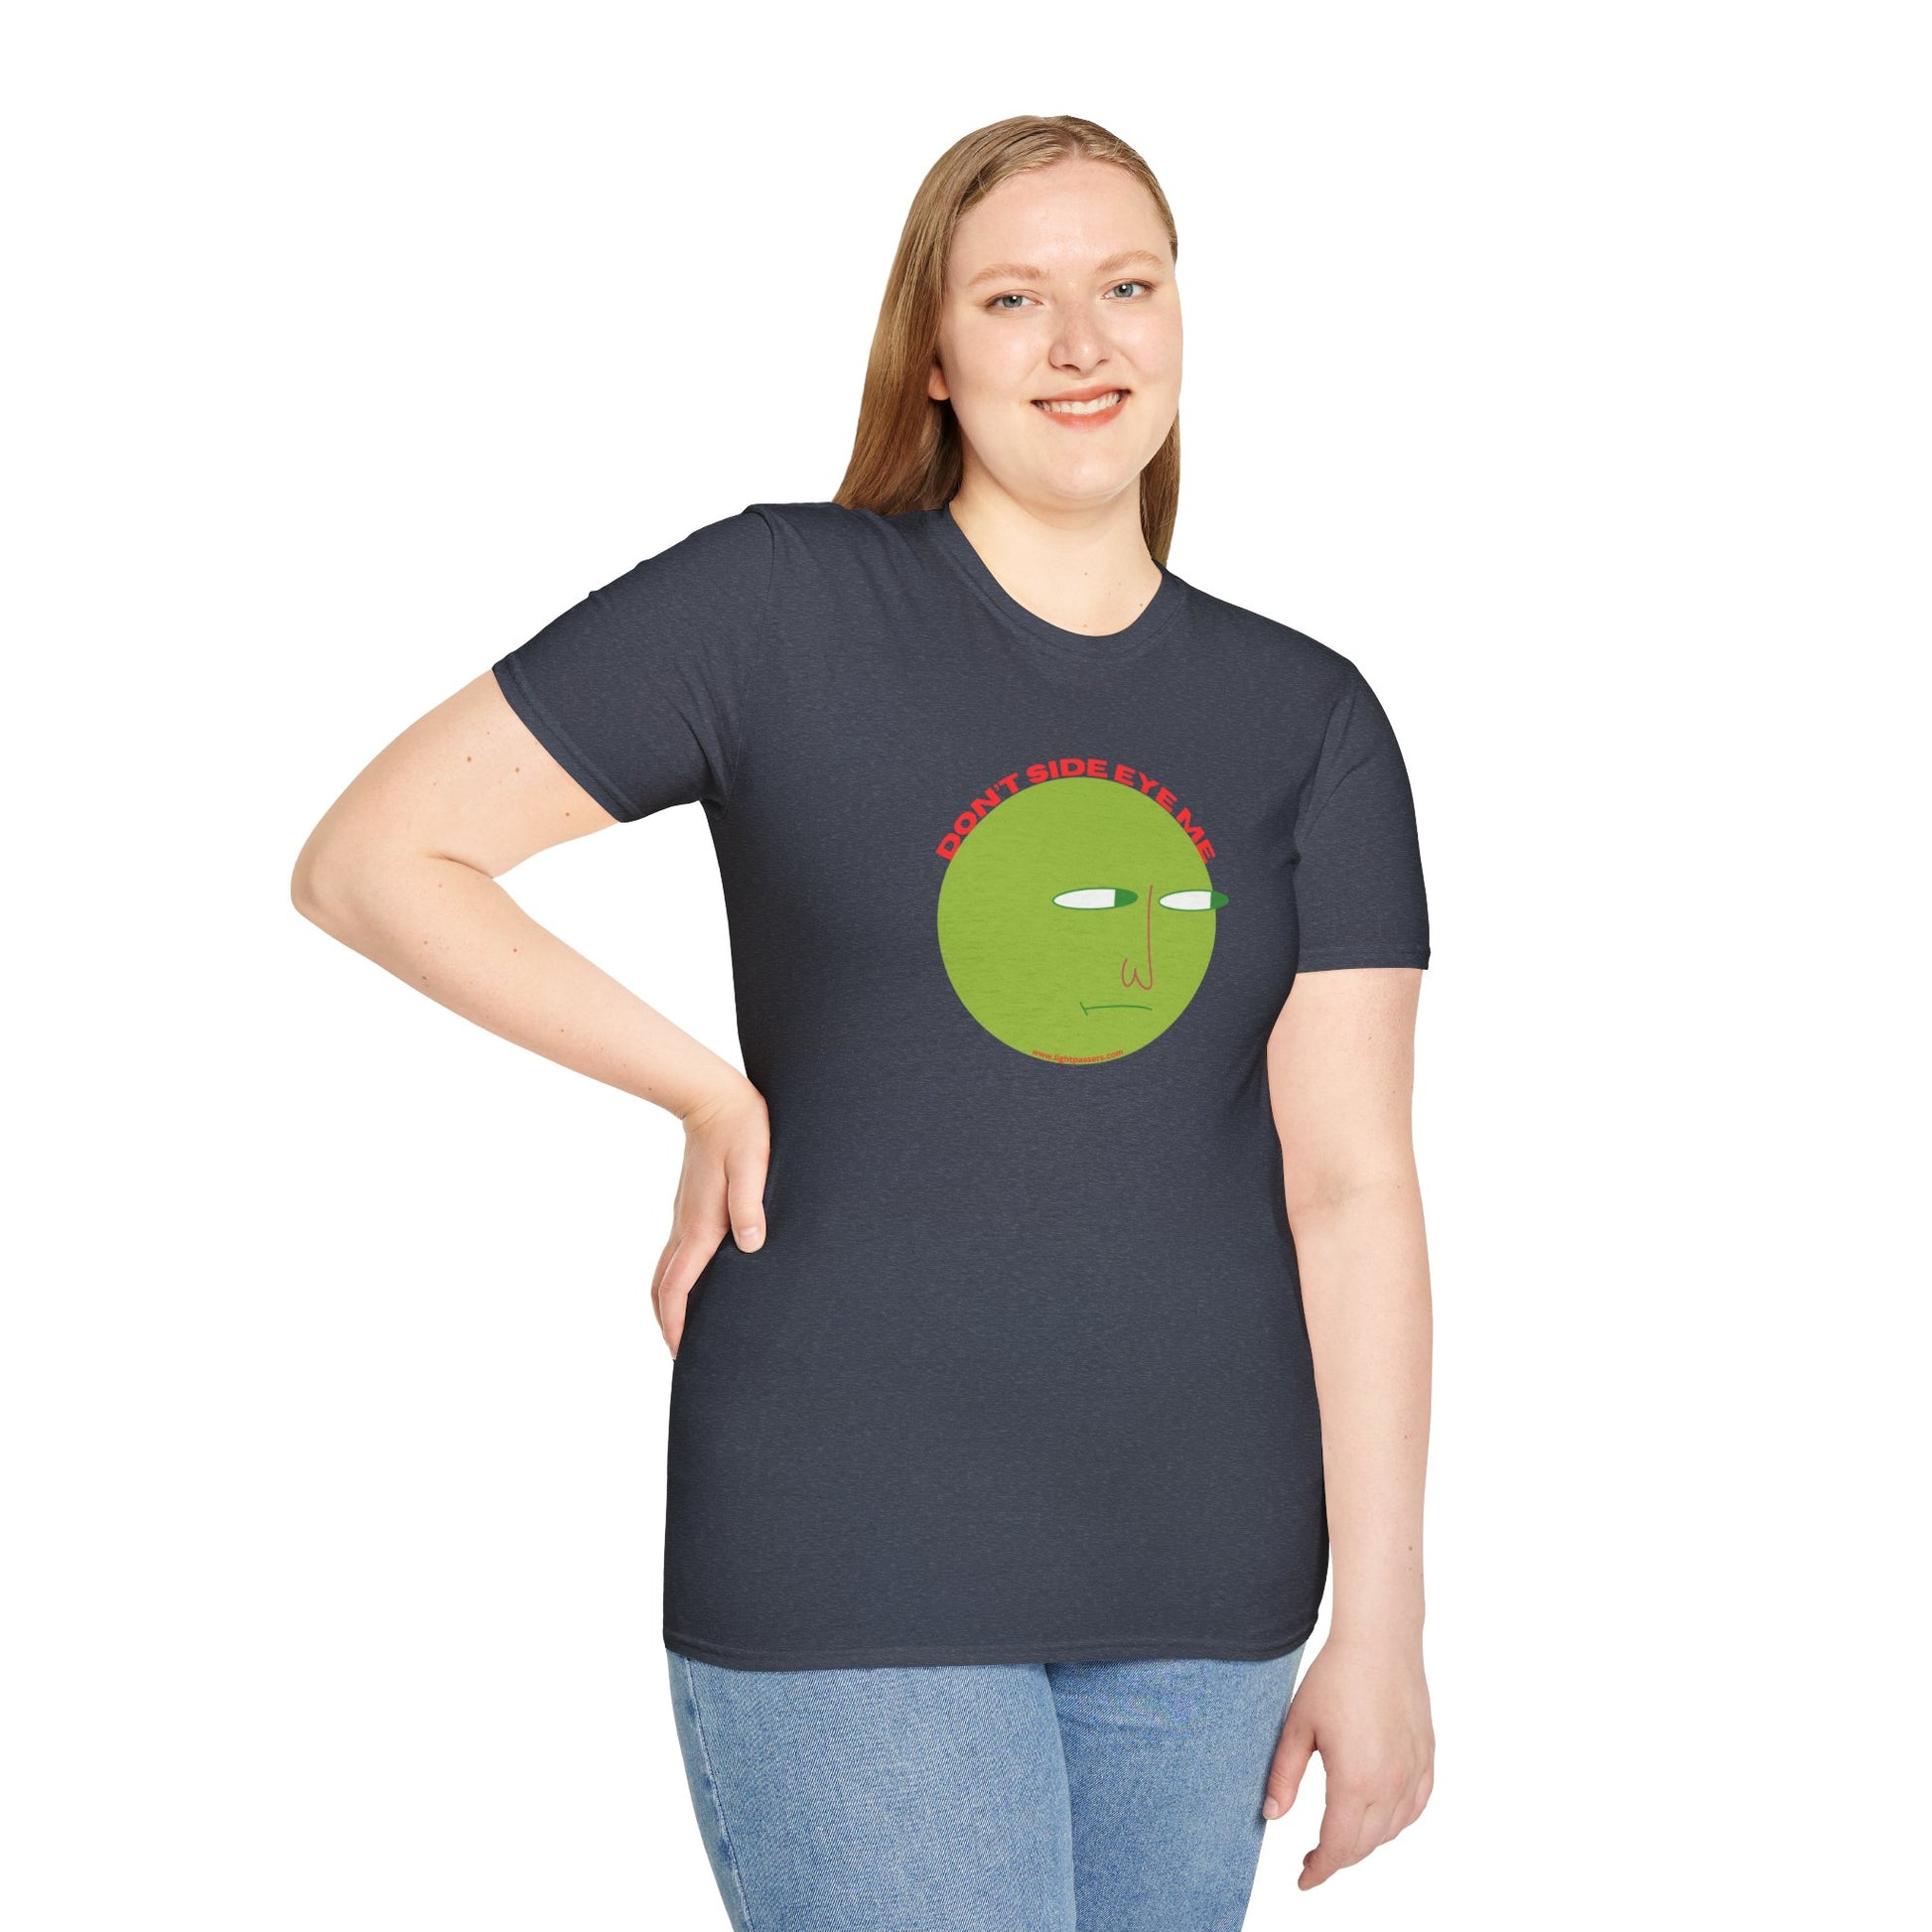 A woman in a grey soft-style unisex t-shirt, smiling, showcasing the casual comfort of the Don't Side Eye Me tee. Made from 100% ring-spun cotton, with twill tape shoulders and no side seams for durability.